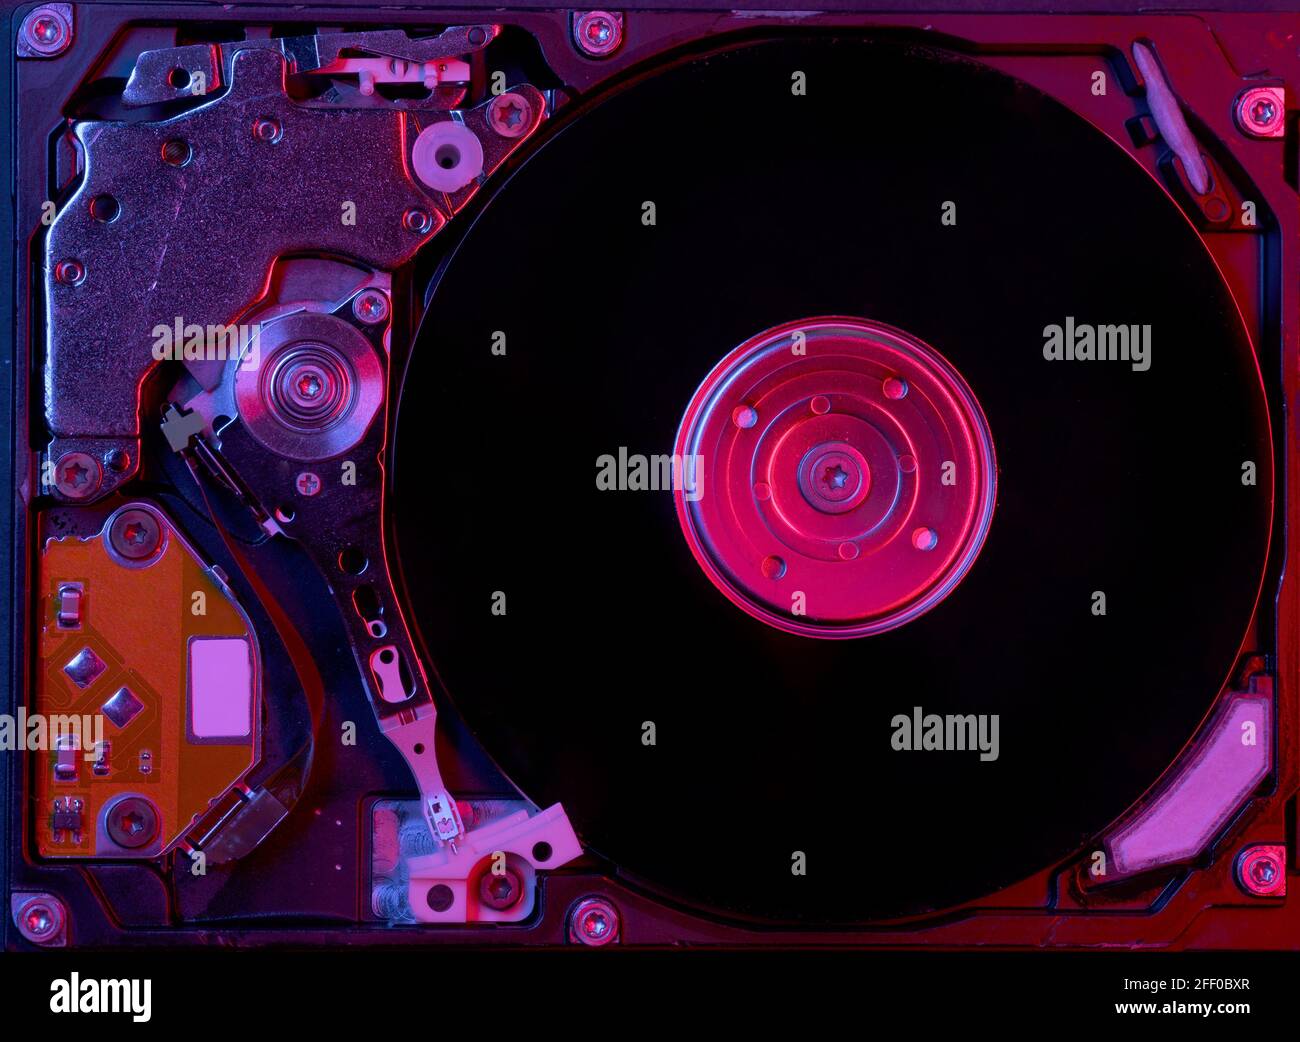 Close up view of a computer hard drive with red-blue lighting. Stock Photo